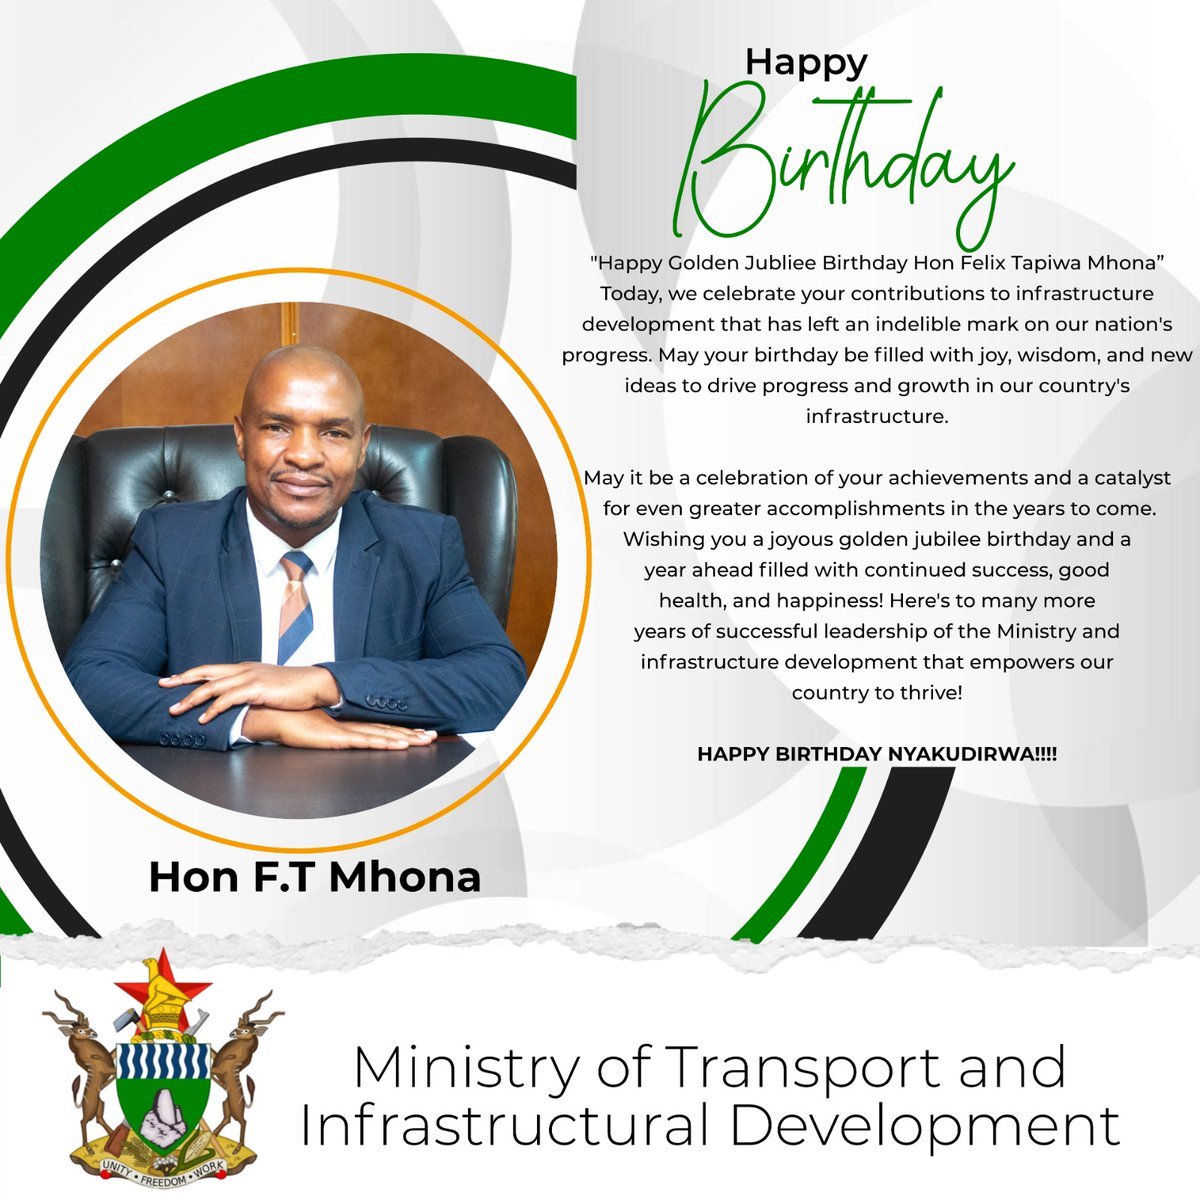 HAPPY BIRTHDAY HON F.T MHONA!! Wishing you a joyous golden jubilee birthday and a year ahead filled with continued success, good health, and happiness.